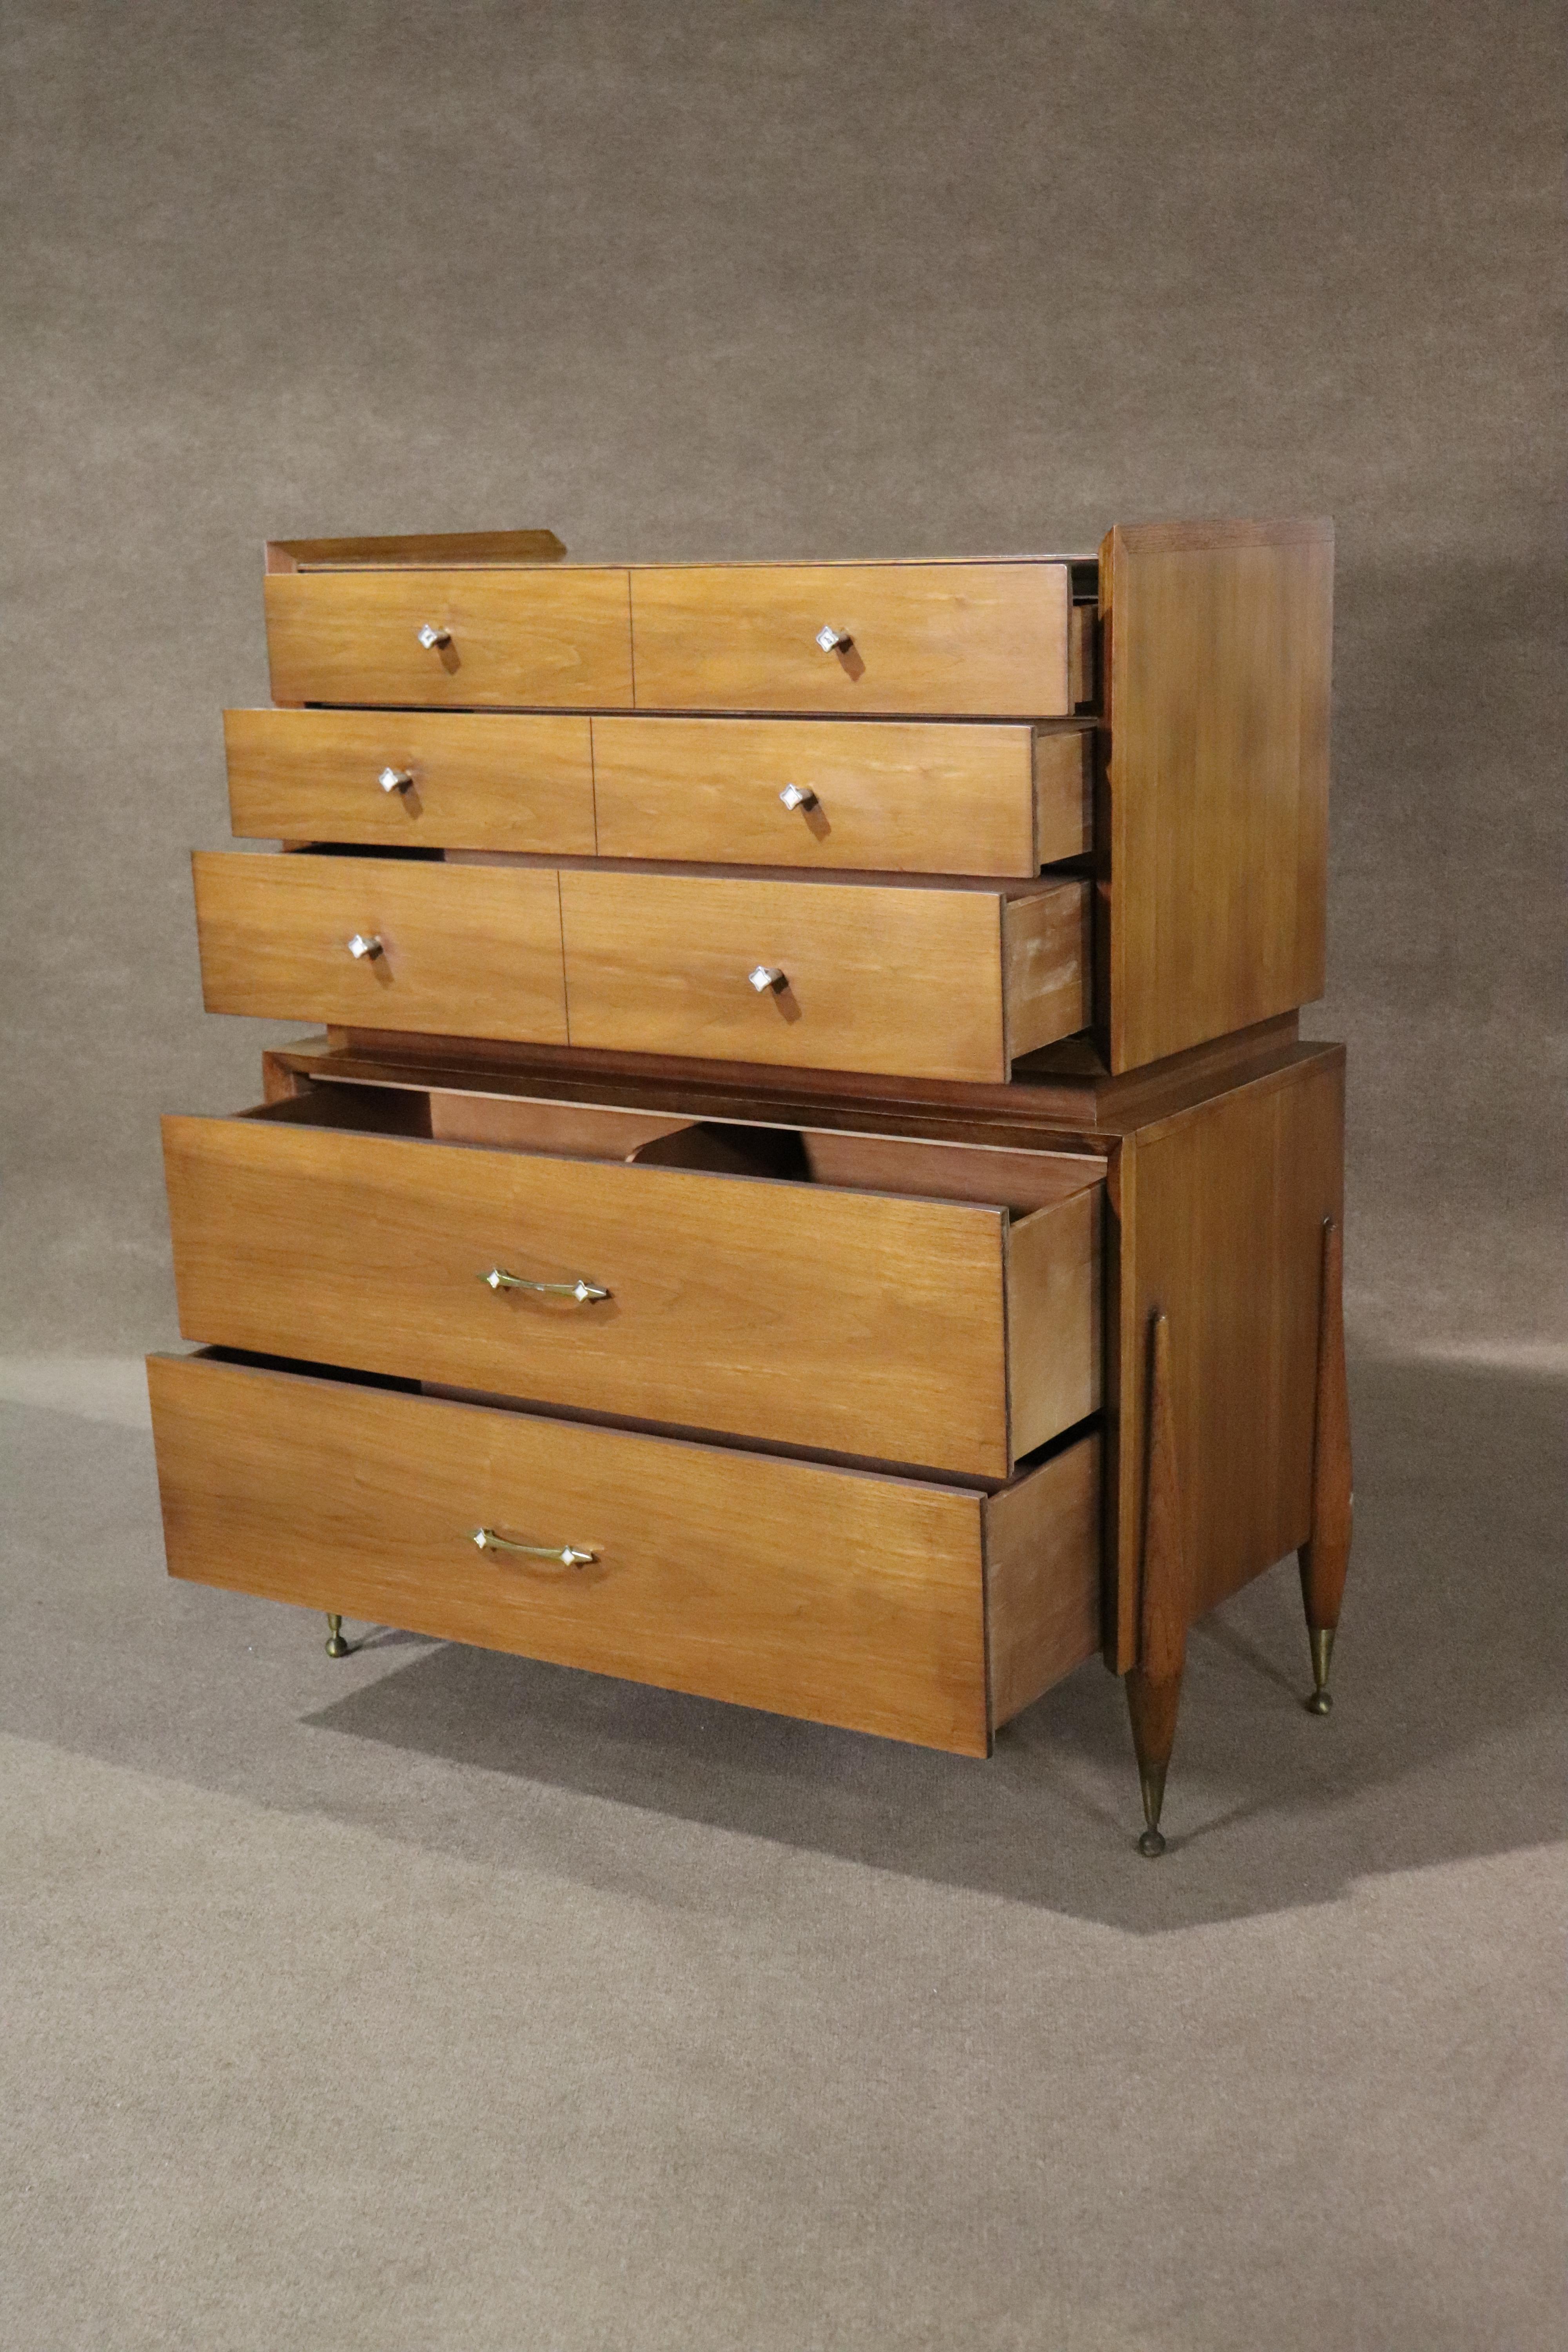 Tall gentleman's chest by Kent Coffey. Five wide drawers, warm walnut wood grain with accenting brass hardware.
Please confirm location NY or NJ